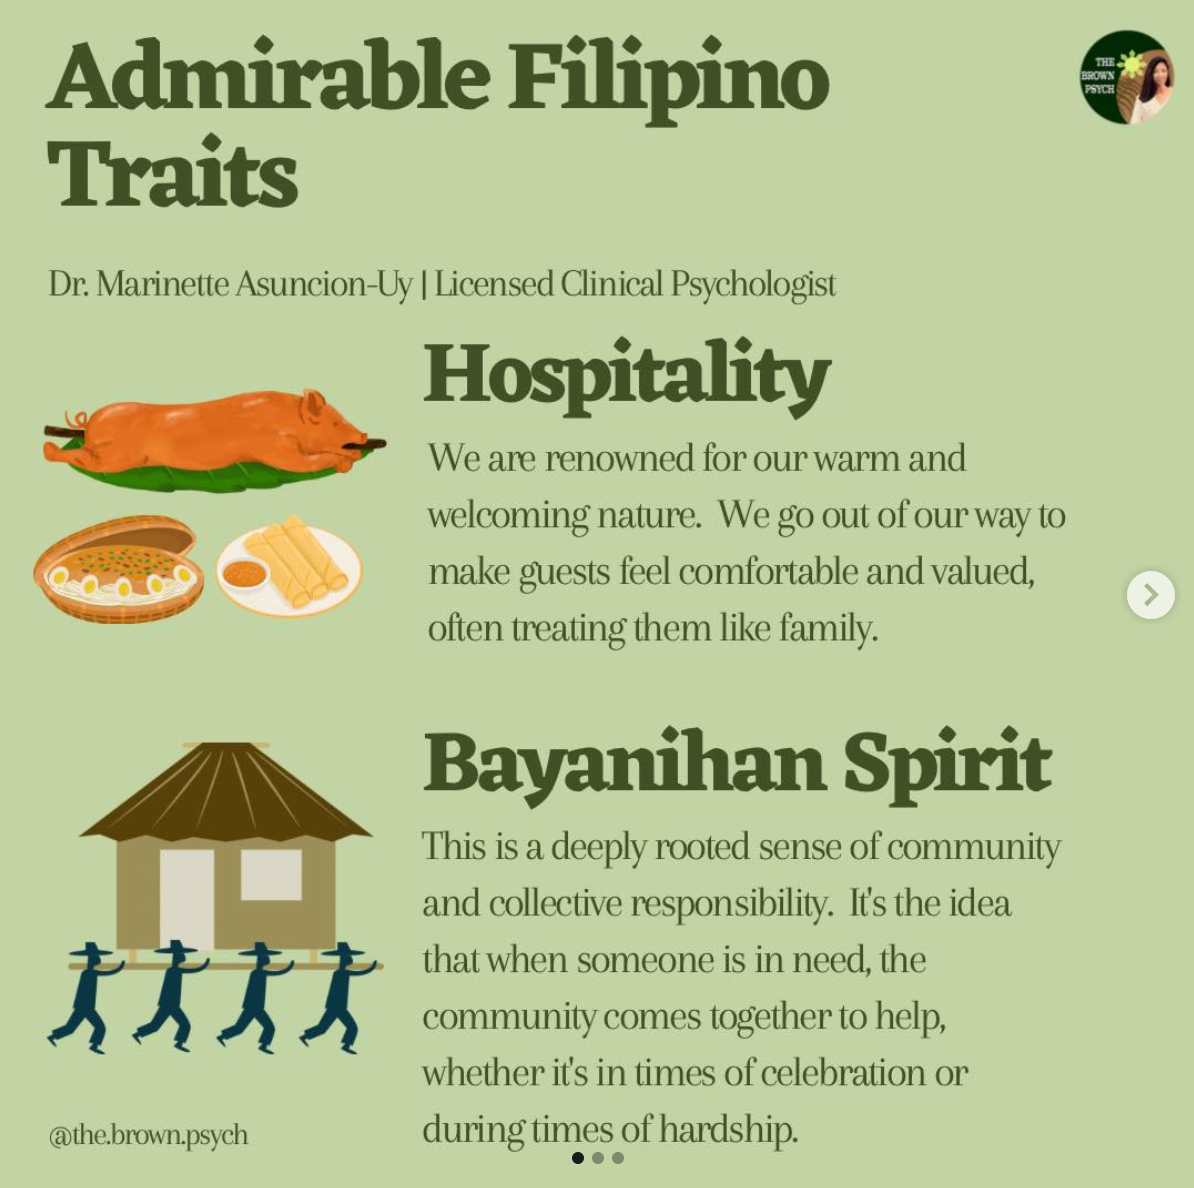 Admirable Filipino
&10;Traits
&10;Dr. Marinette Asuncion-Uy | Licensed Clinical Psychologist
&10;Hospitality
&10;We are renowned for our warm and welcoming nature. We go out of our way to make guests feel comfortable and valued, often treating them like family.
&10;Bayanihan Spirit
&10;This is a deeply rooted sense of community and collective responsibility. It's the idea that when someone is in need, the community comes together to help, whether it's in times of celebration or
&10;@the.brown.psych
&10;during times of hardship.